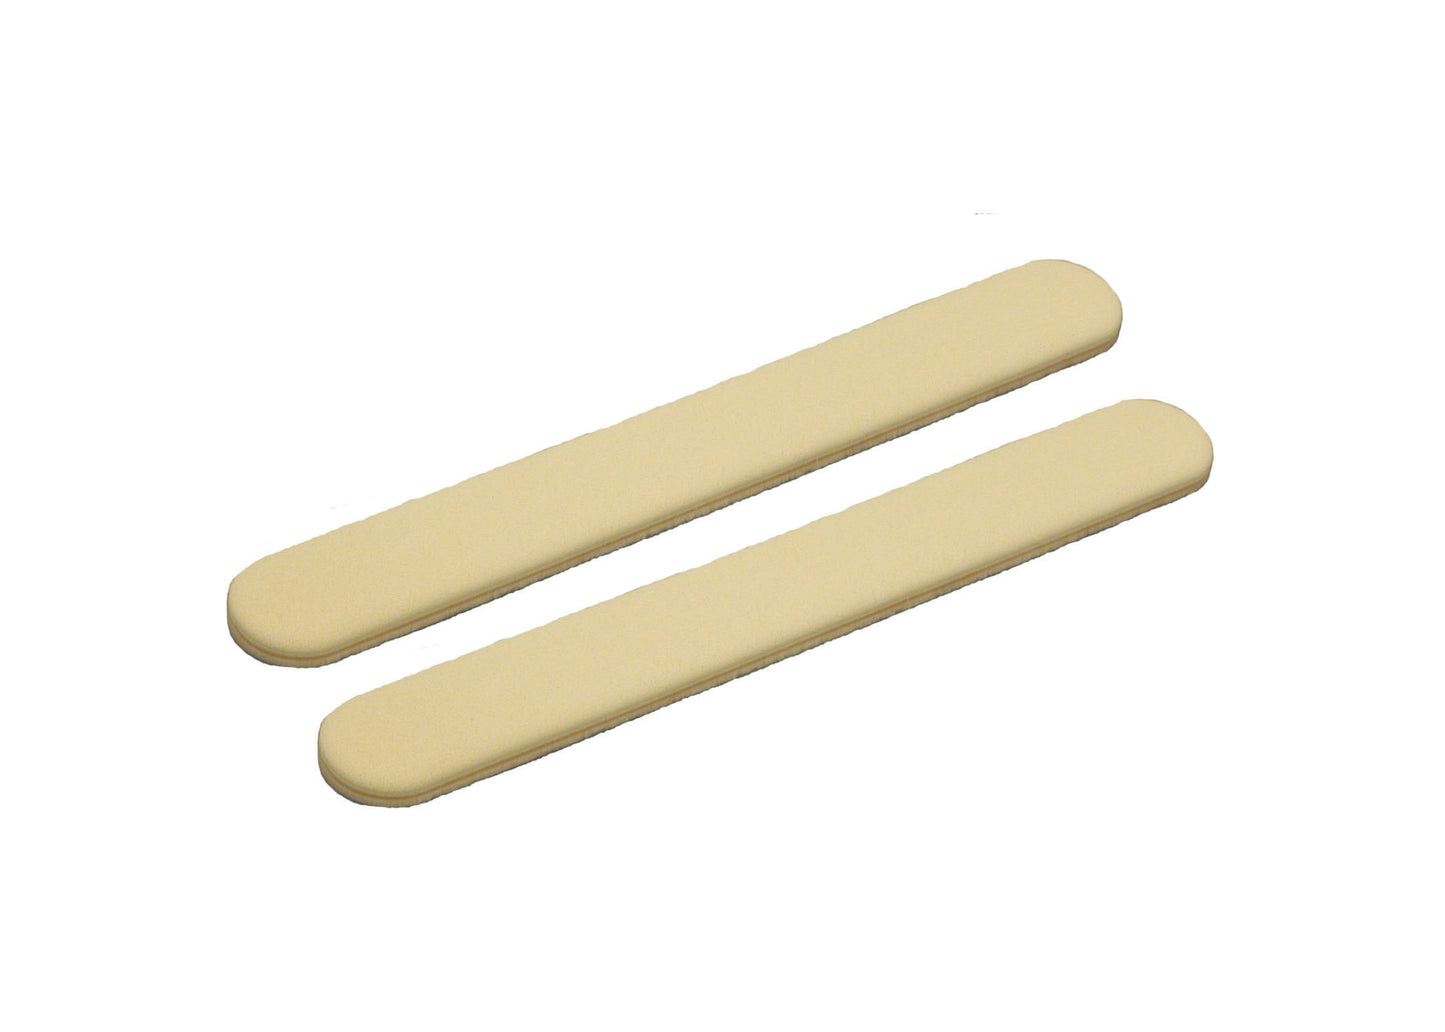 ProStrong ProBuff Nail File - Set of 2